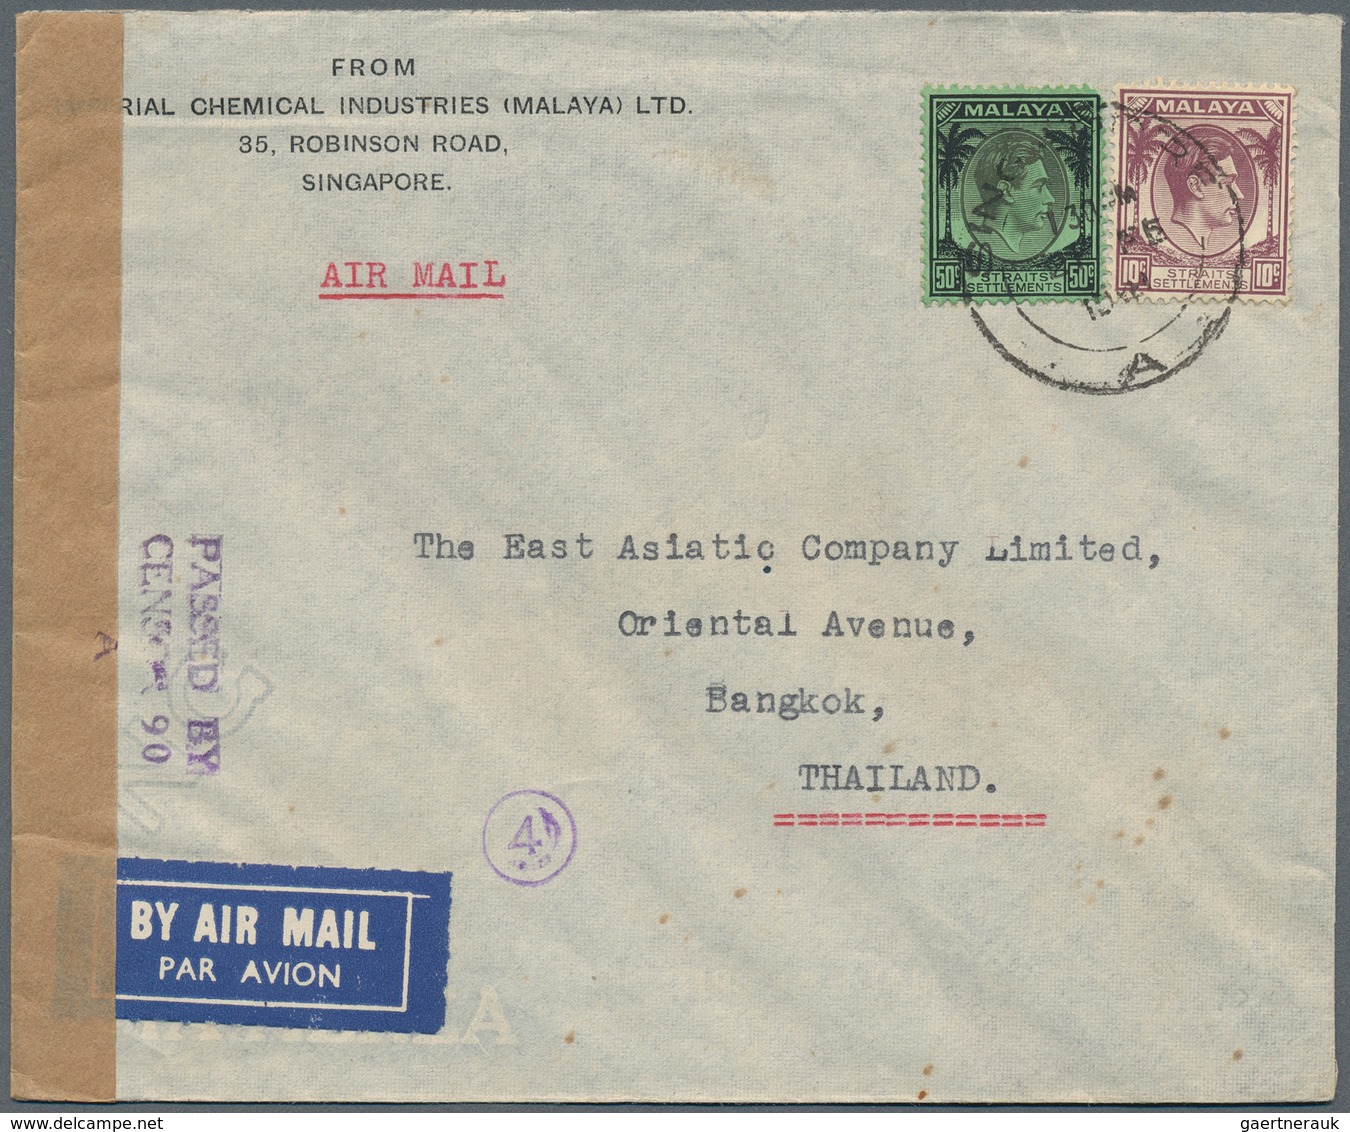 Singapur: 1940/1941, four censored covers bearing different Straits Settlements KGVI definitives all